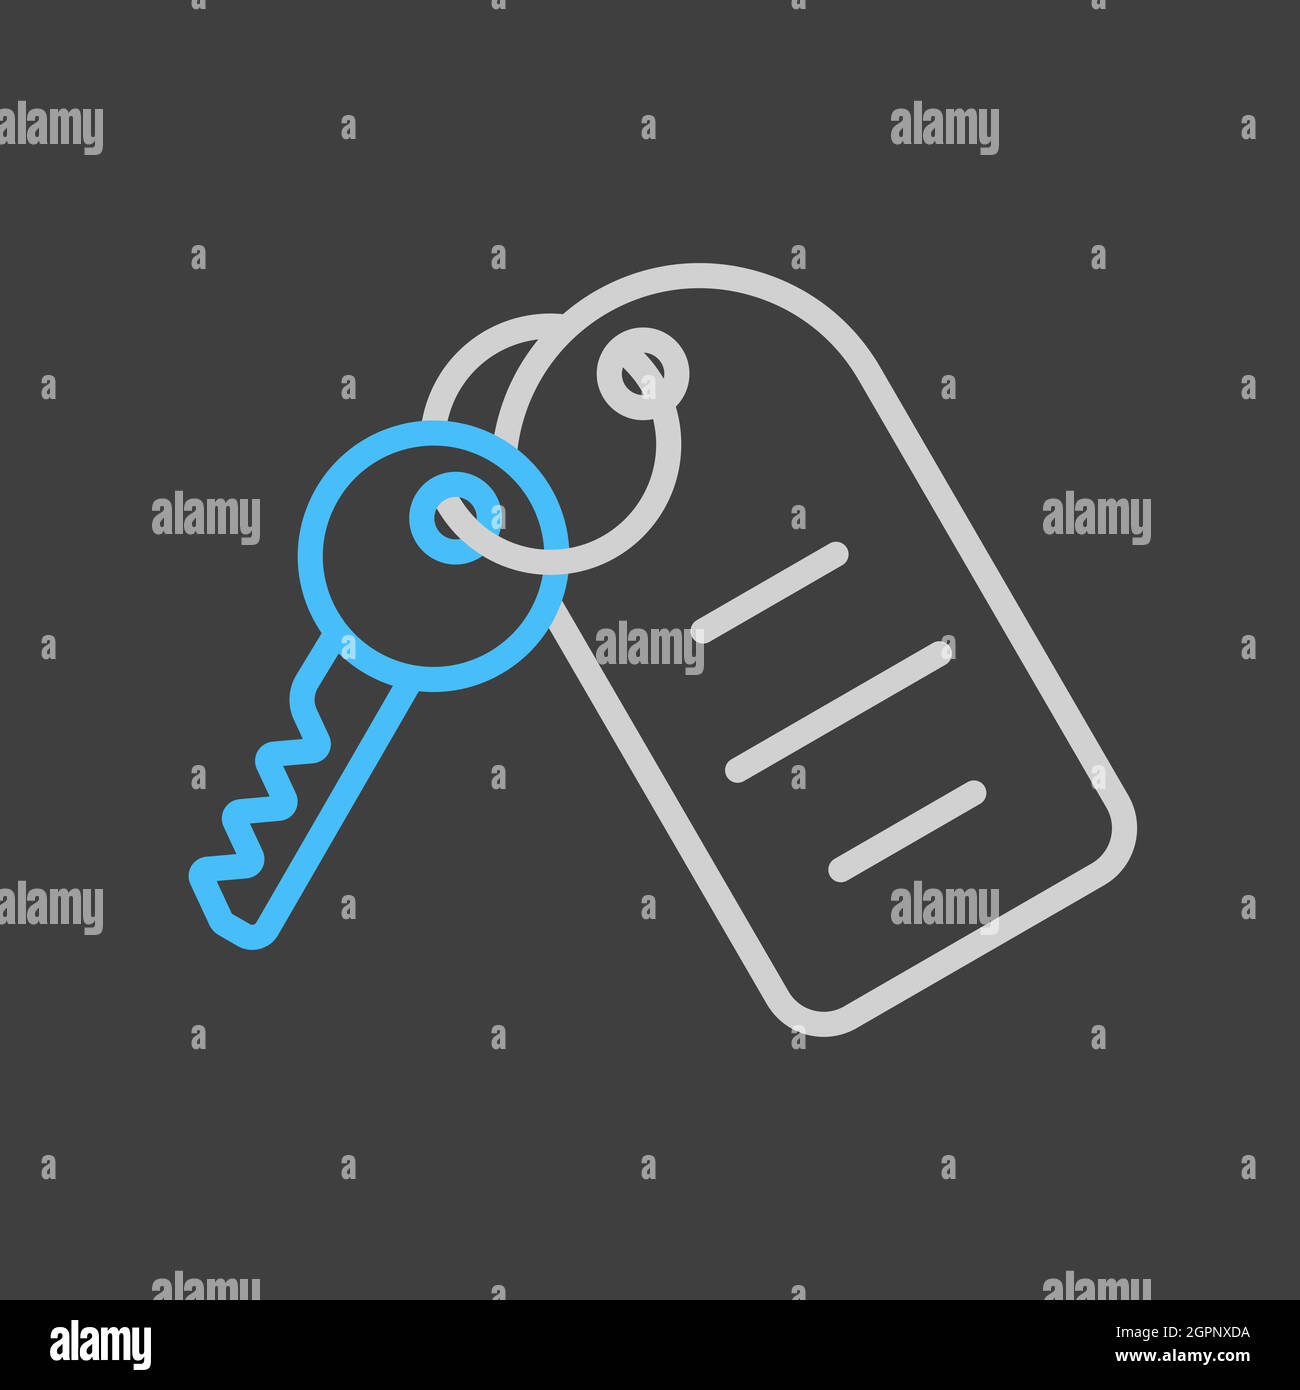 Hotel room key with number vector icon on dark background Stock Vector